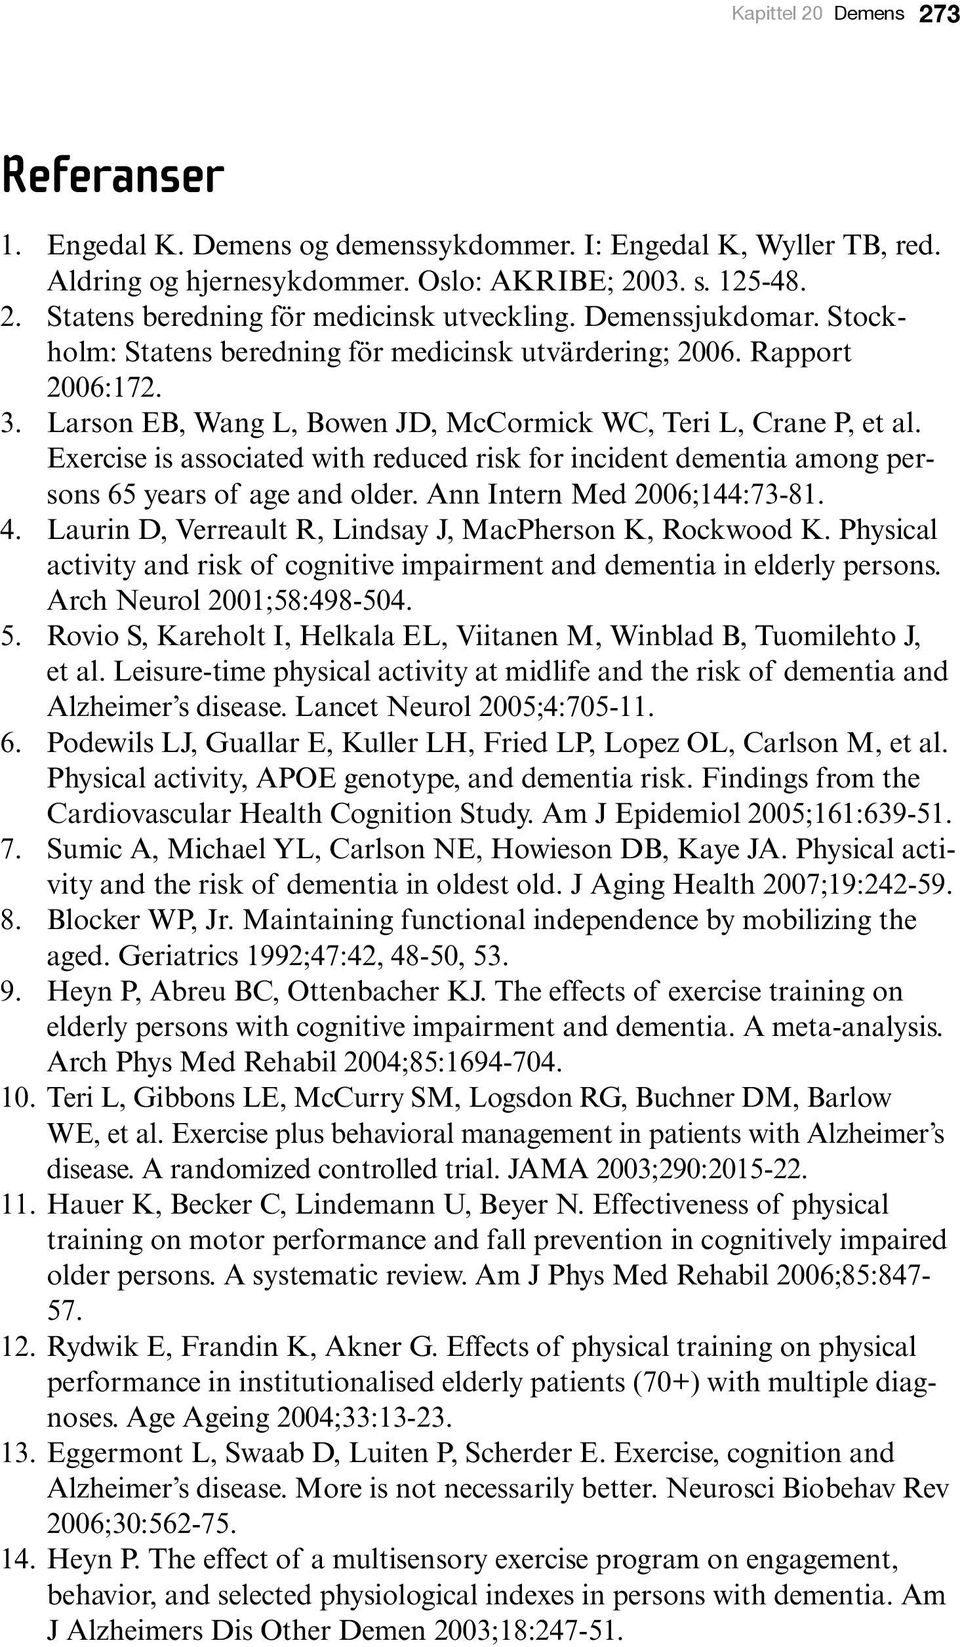 Exercise is associated with reduced risk for incident dementia among persons 65 years of age and older. Ann Intern Med 2006;144:73-81. 4. Laurin D, Verreault R, Lindsay J, MacPherson K, Rockwood K.